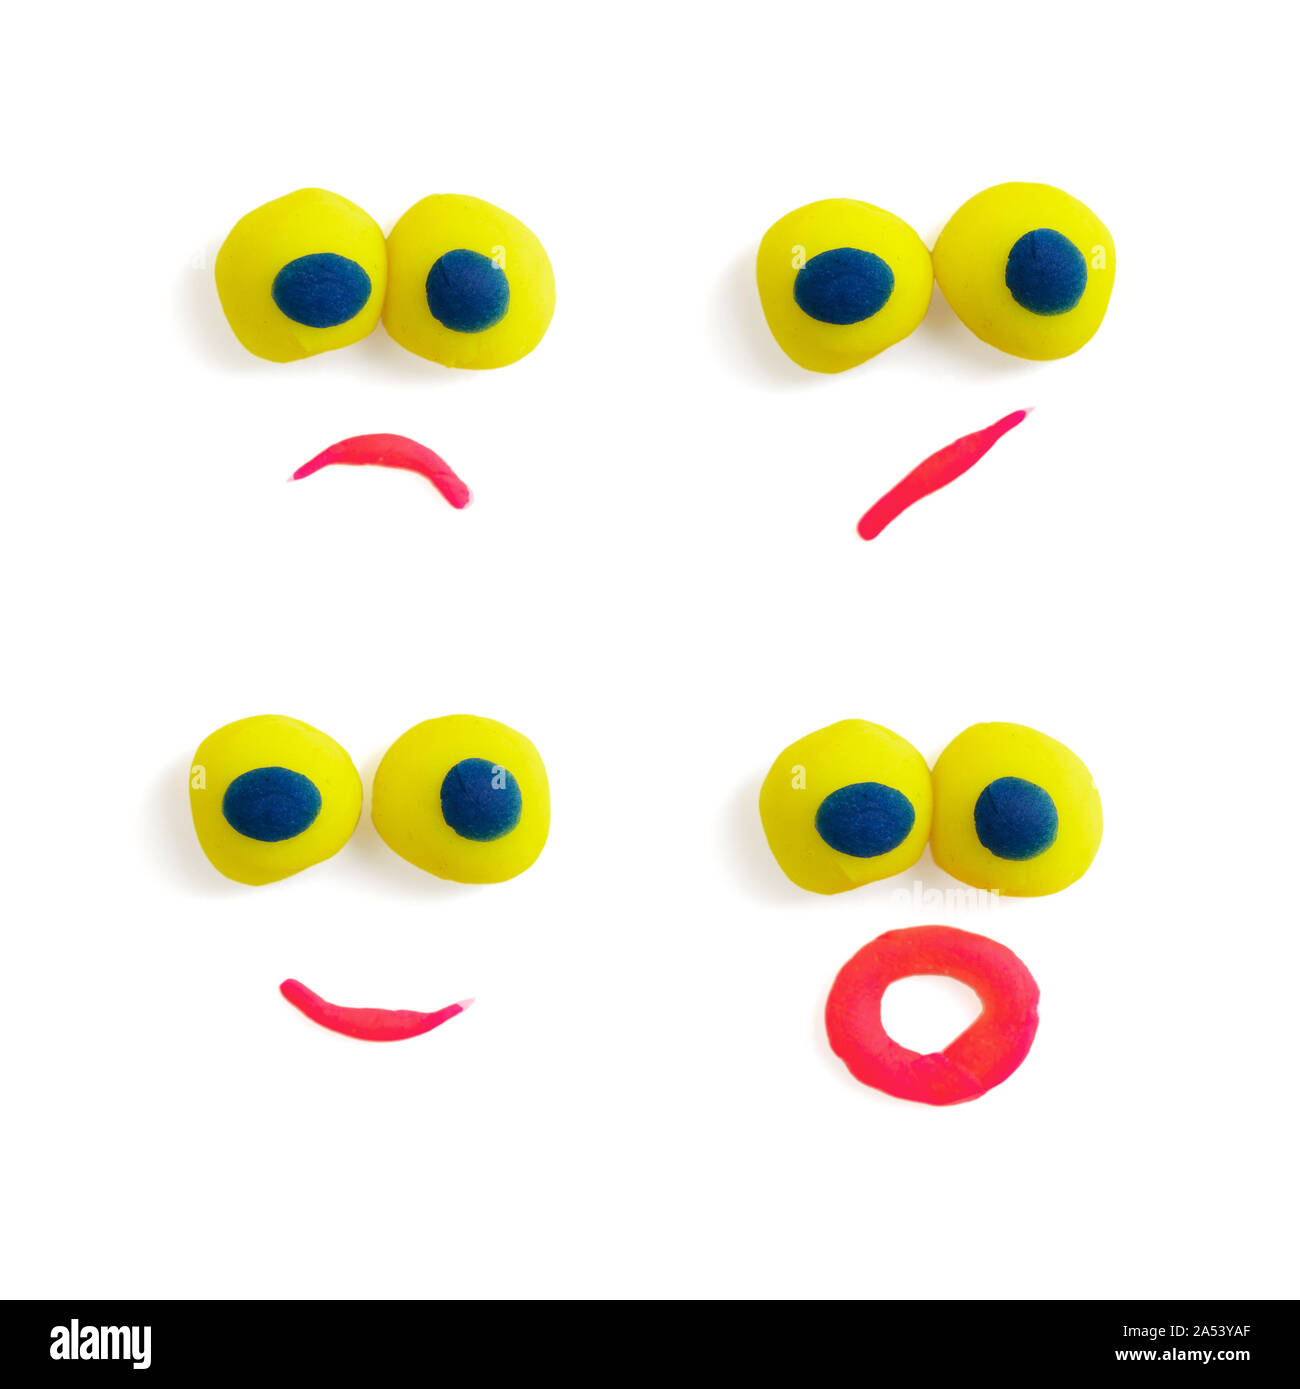 Four funny faces - eyes and mouths - made of multicolored plasticine with different expressions on the white background. Stock Photo